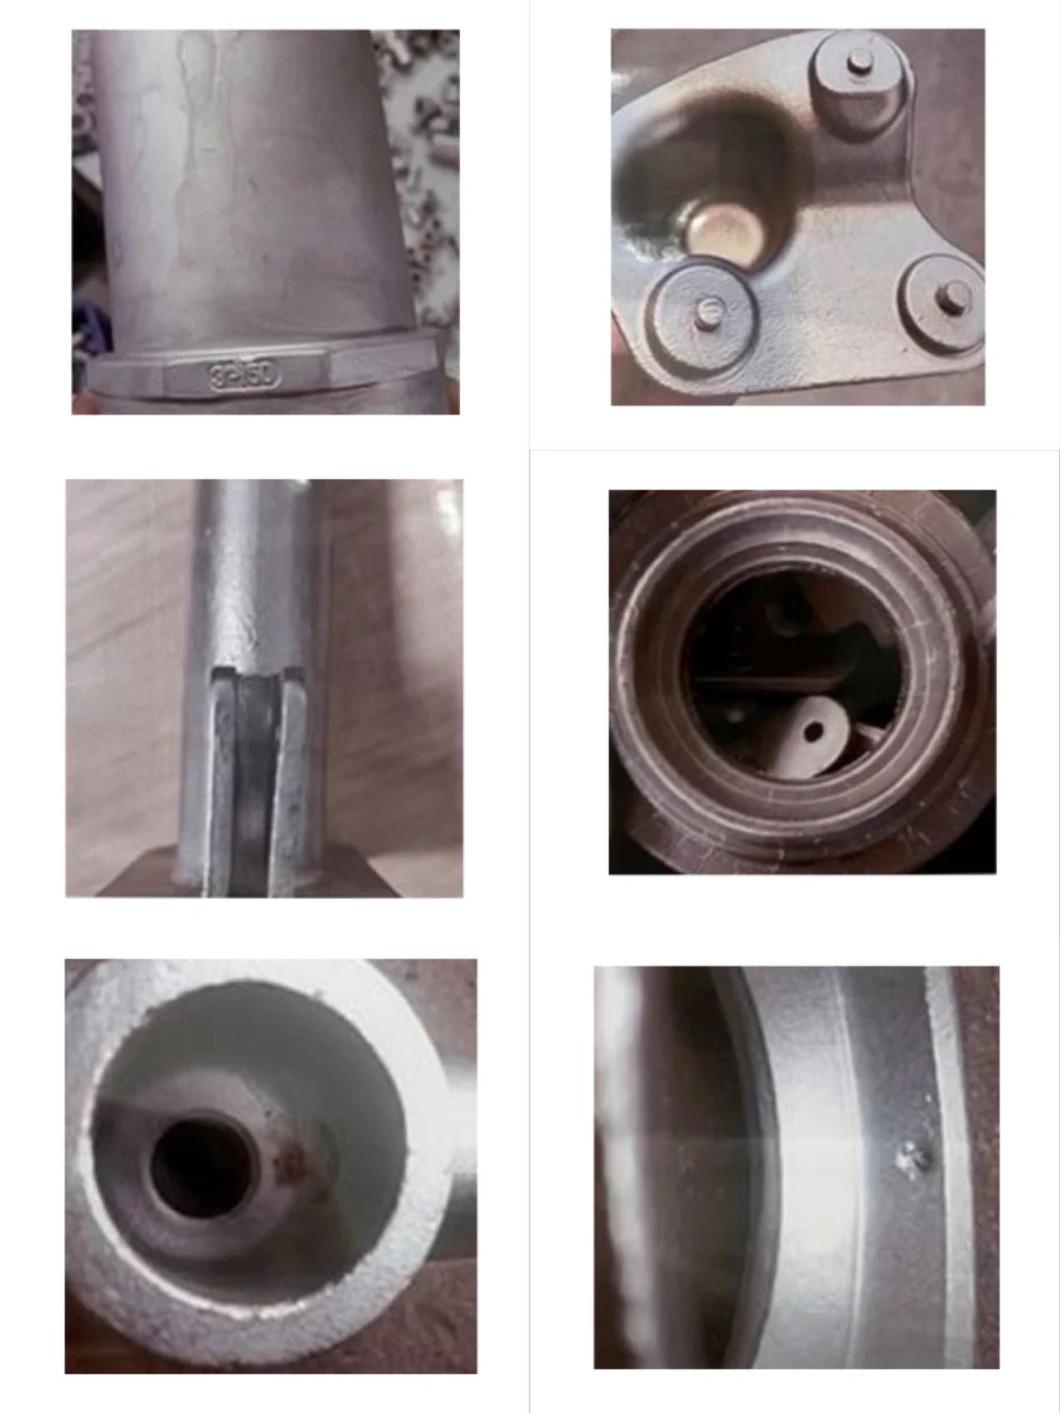 Stainless Steel Pipe Cap Pipe Socket Y Type Tee Machinery Parts Lost Wax Casting Pipe Fittings